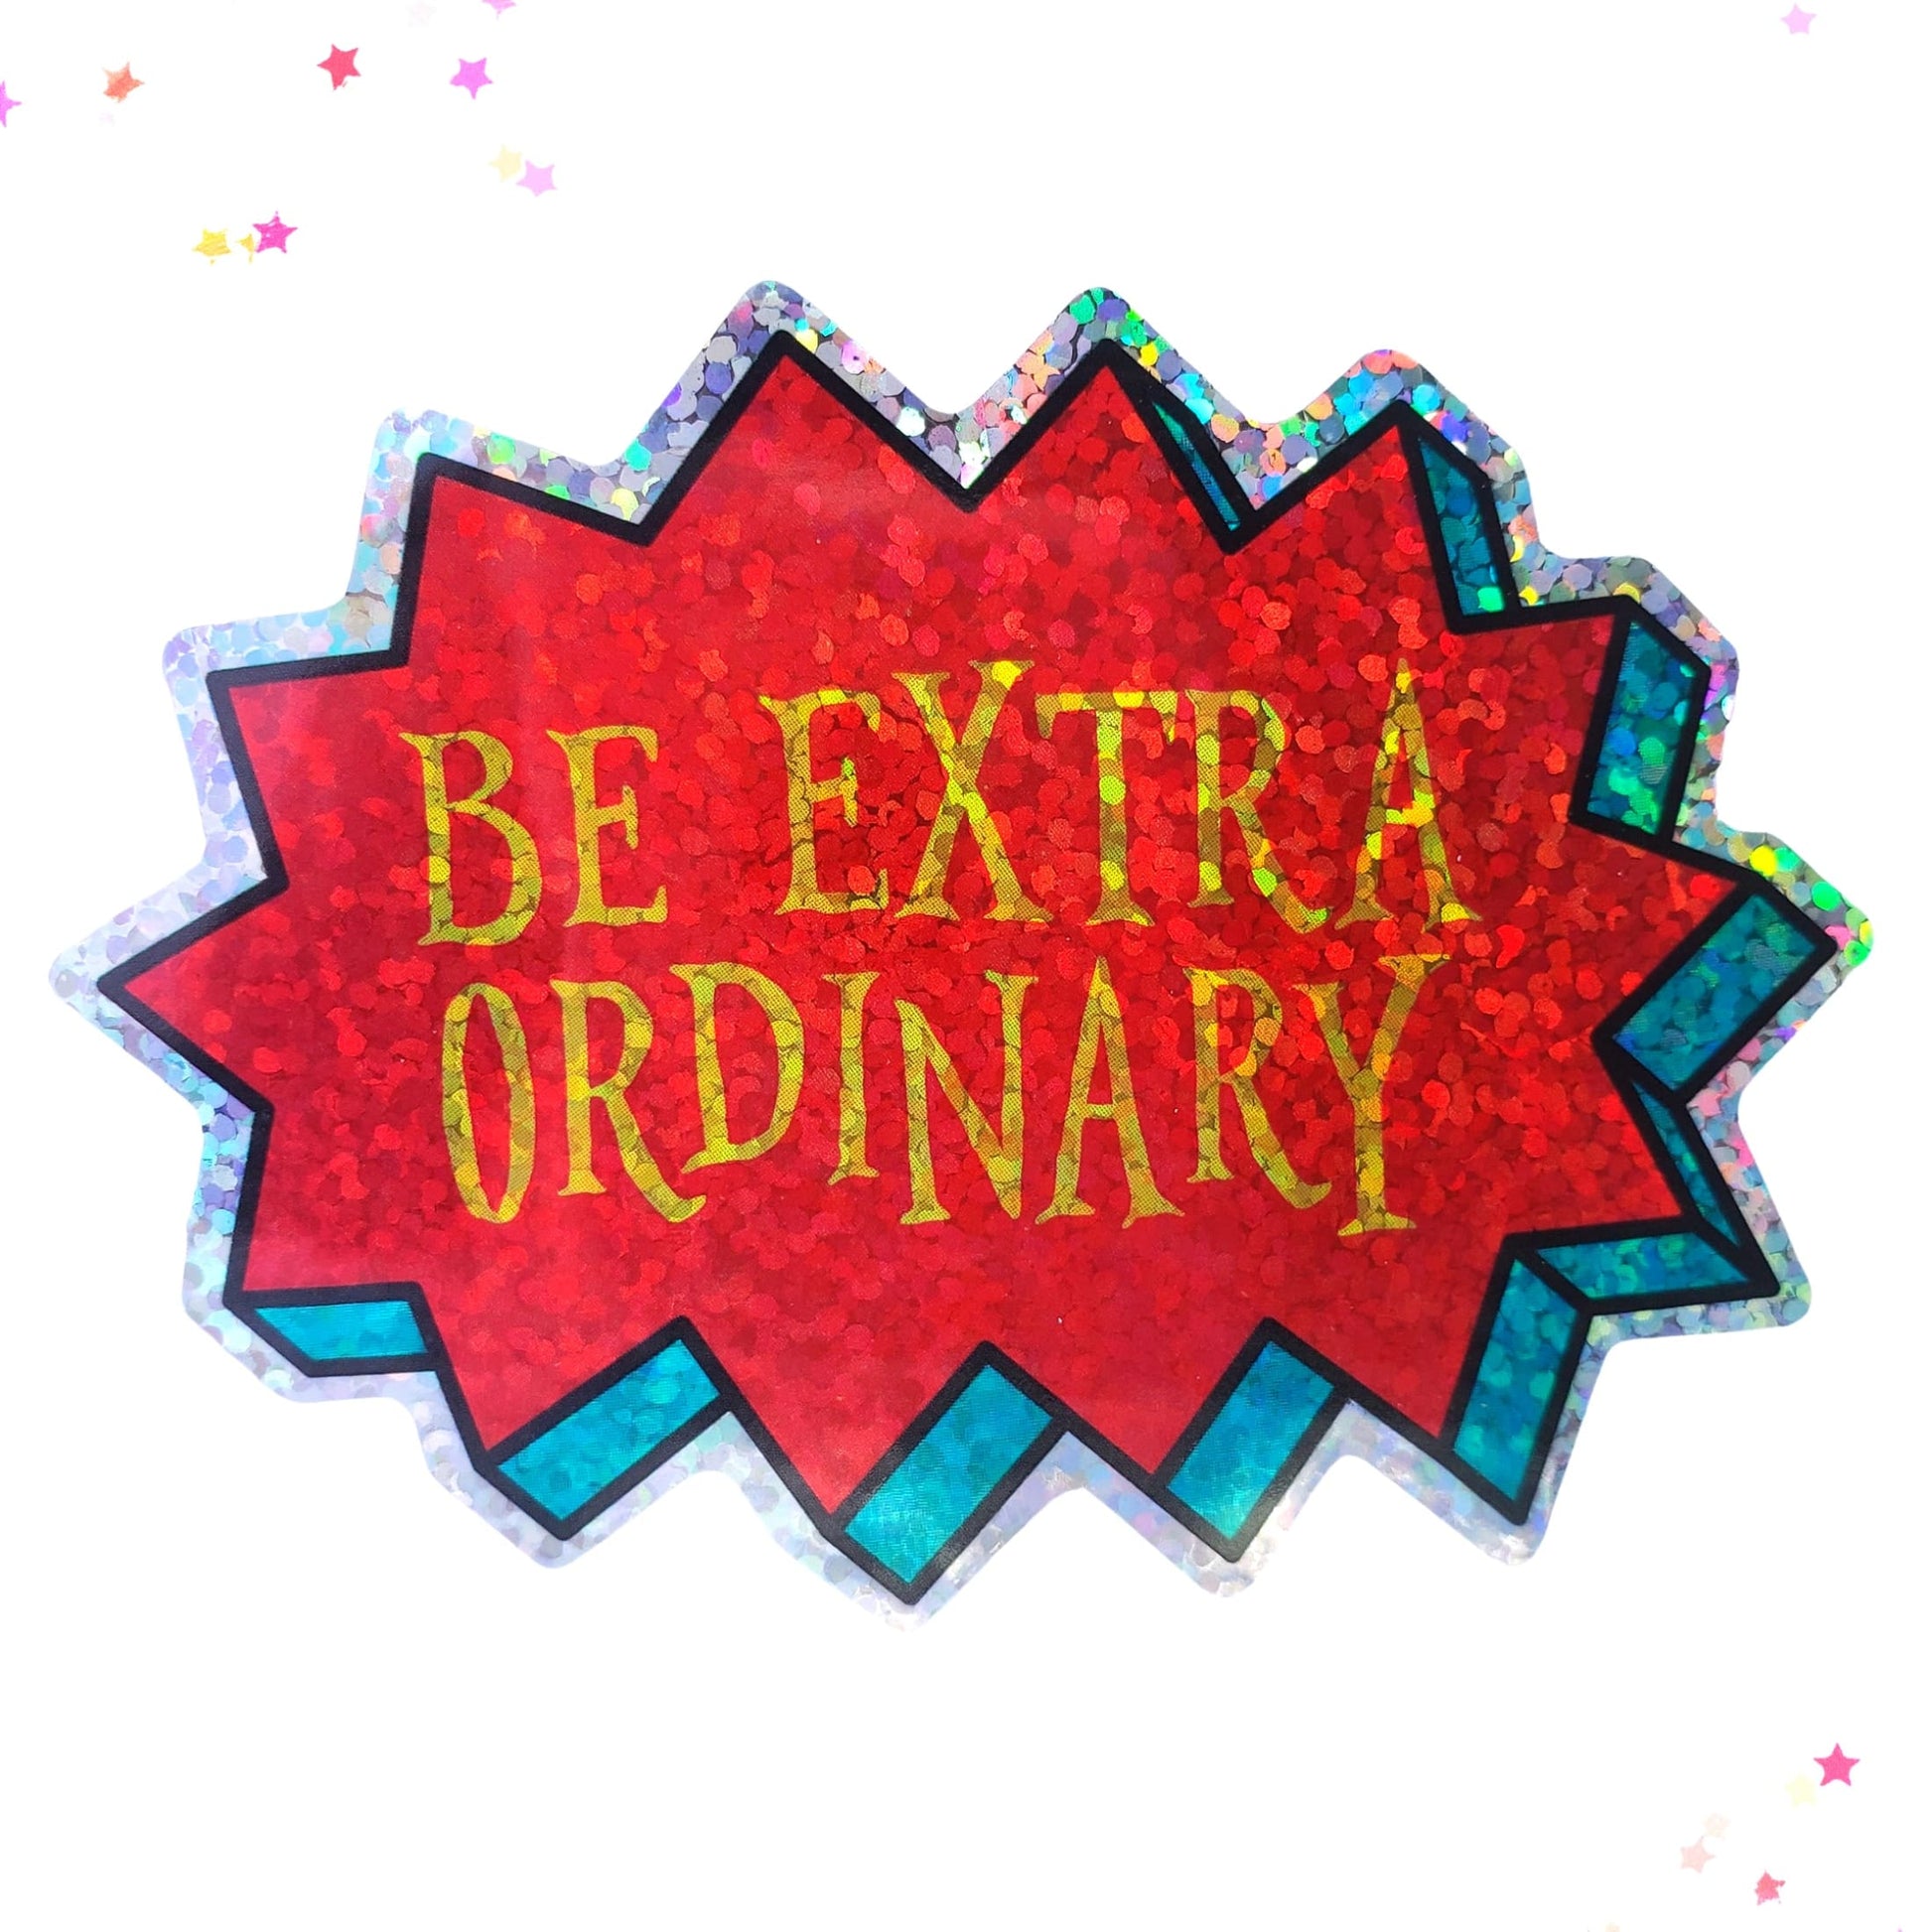 Premium Sticker - Sparkly Holographic Glitter Be Extra Ordinary from Confetti Kitty, Only 2.00